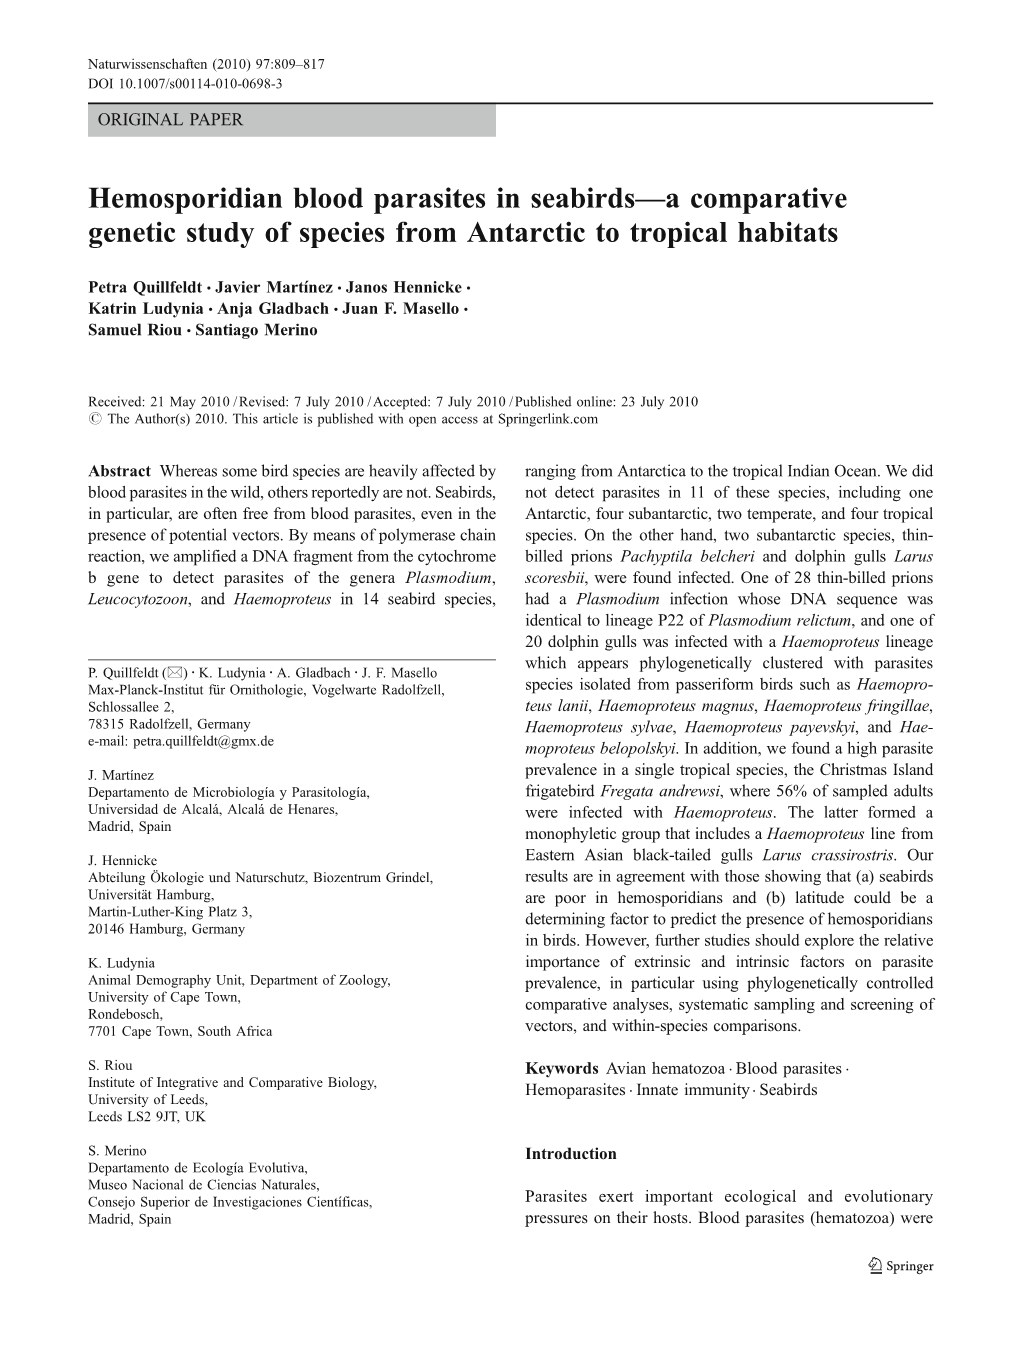 Hemosporidian Blood Parasites in Seabirds—A Comparative Genetic Study of Species from Antarctic to Tropical Habitats